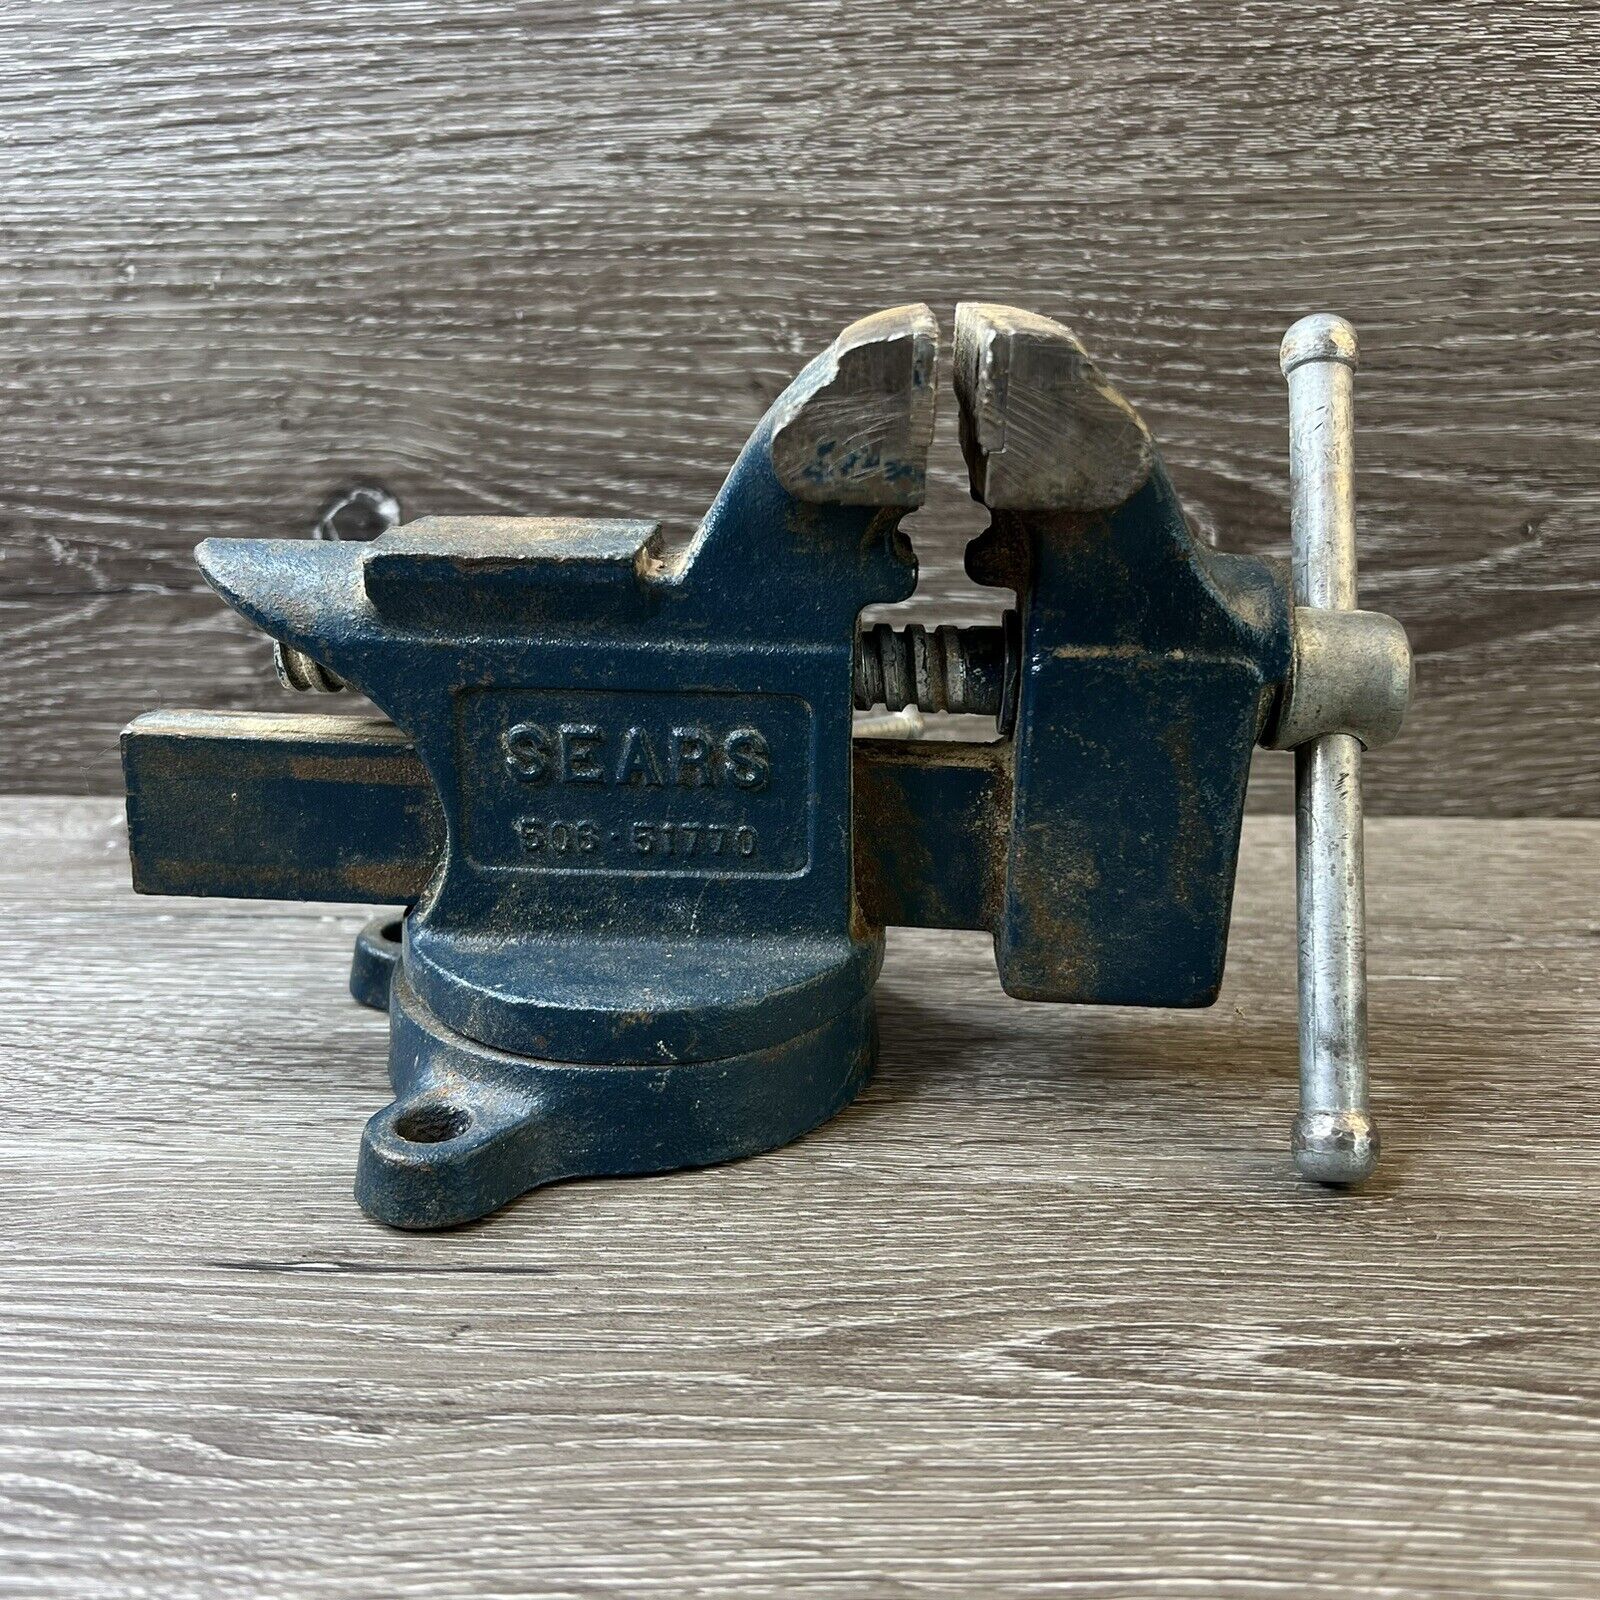 Vintage Sears Swivel Bench Top Vise and Anvil 506 51770 3 1/2\